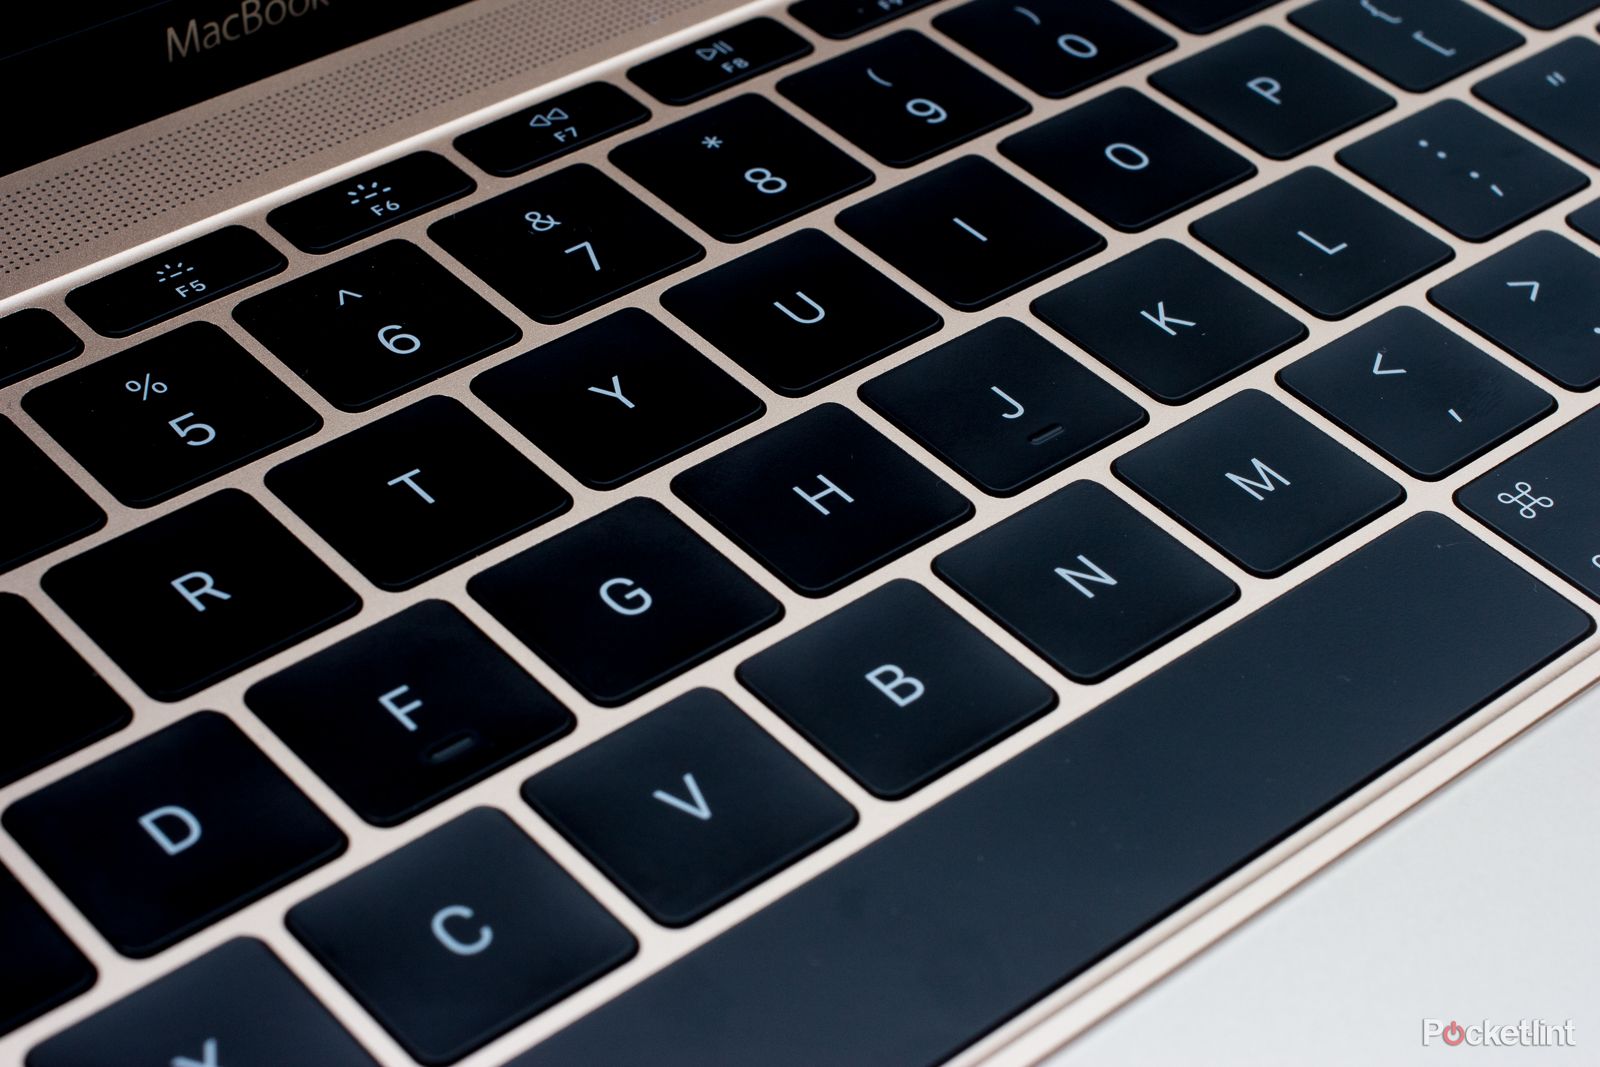 apple’s future macbook keyboards could get rid of the keys altogether image 1